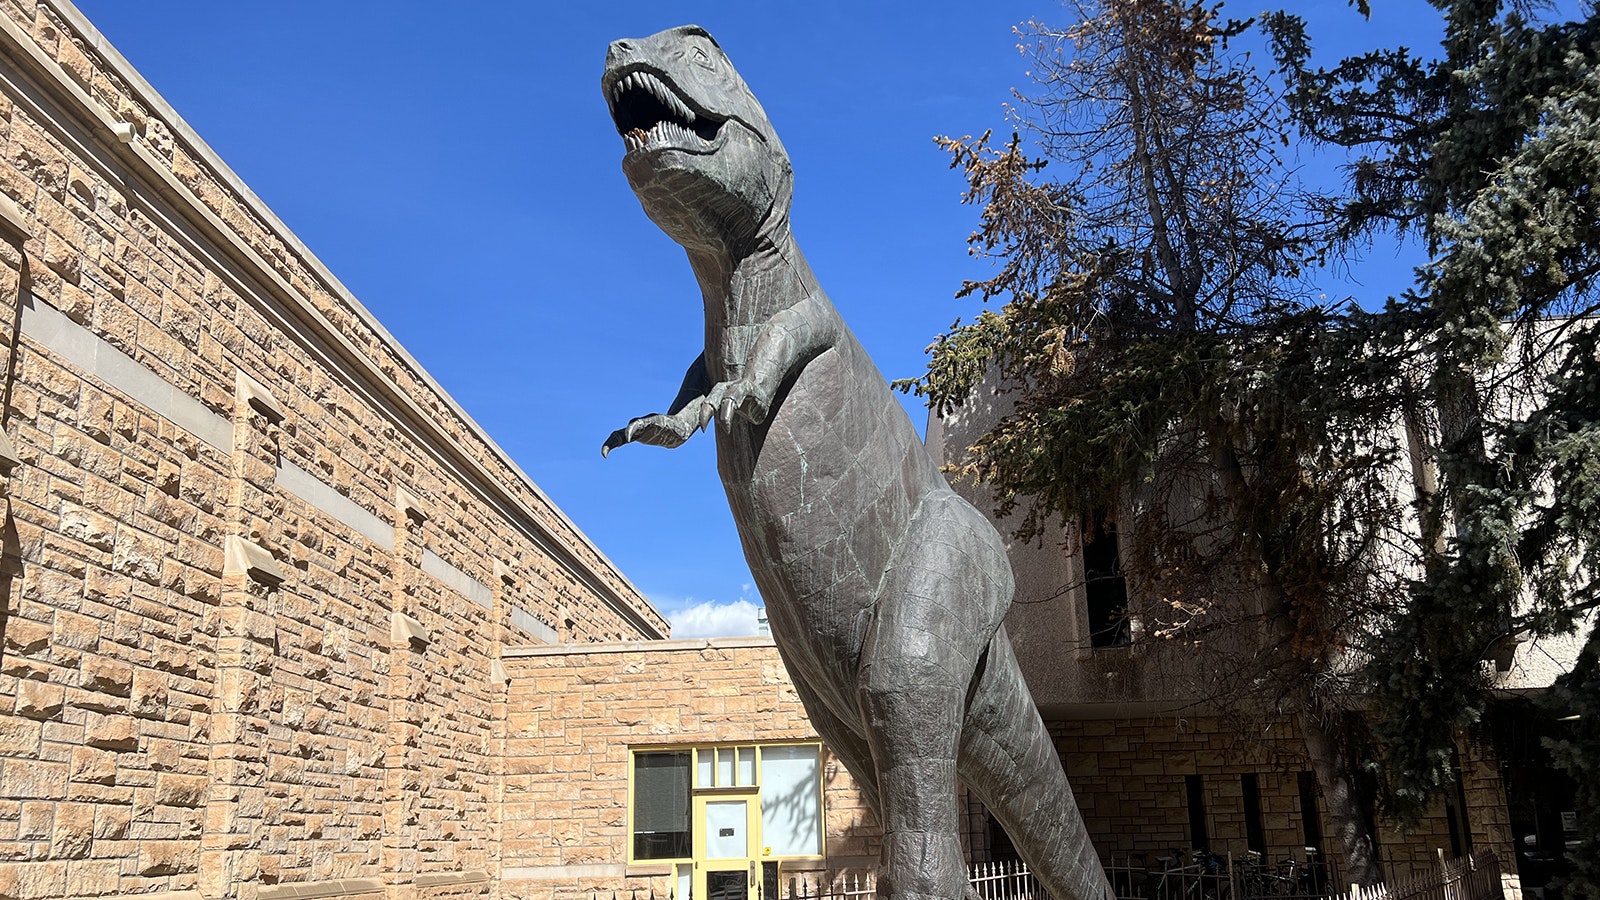 A life-sized copper Tyrannosaurus rex statue, affectionately called “Rexy,” has stood outside the University of Wyoming’s Geological Museum for about 60 years.